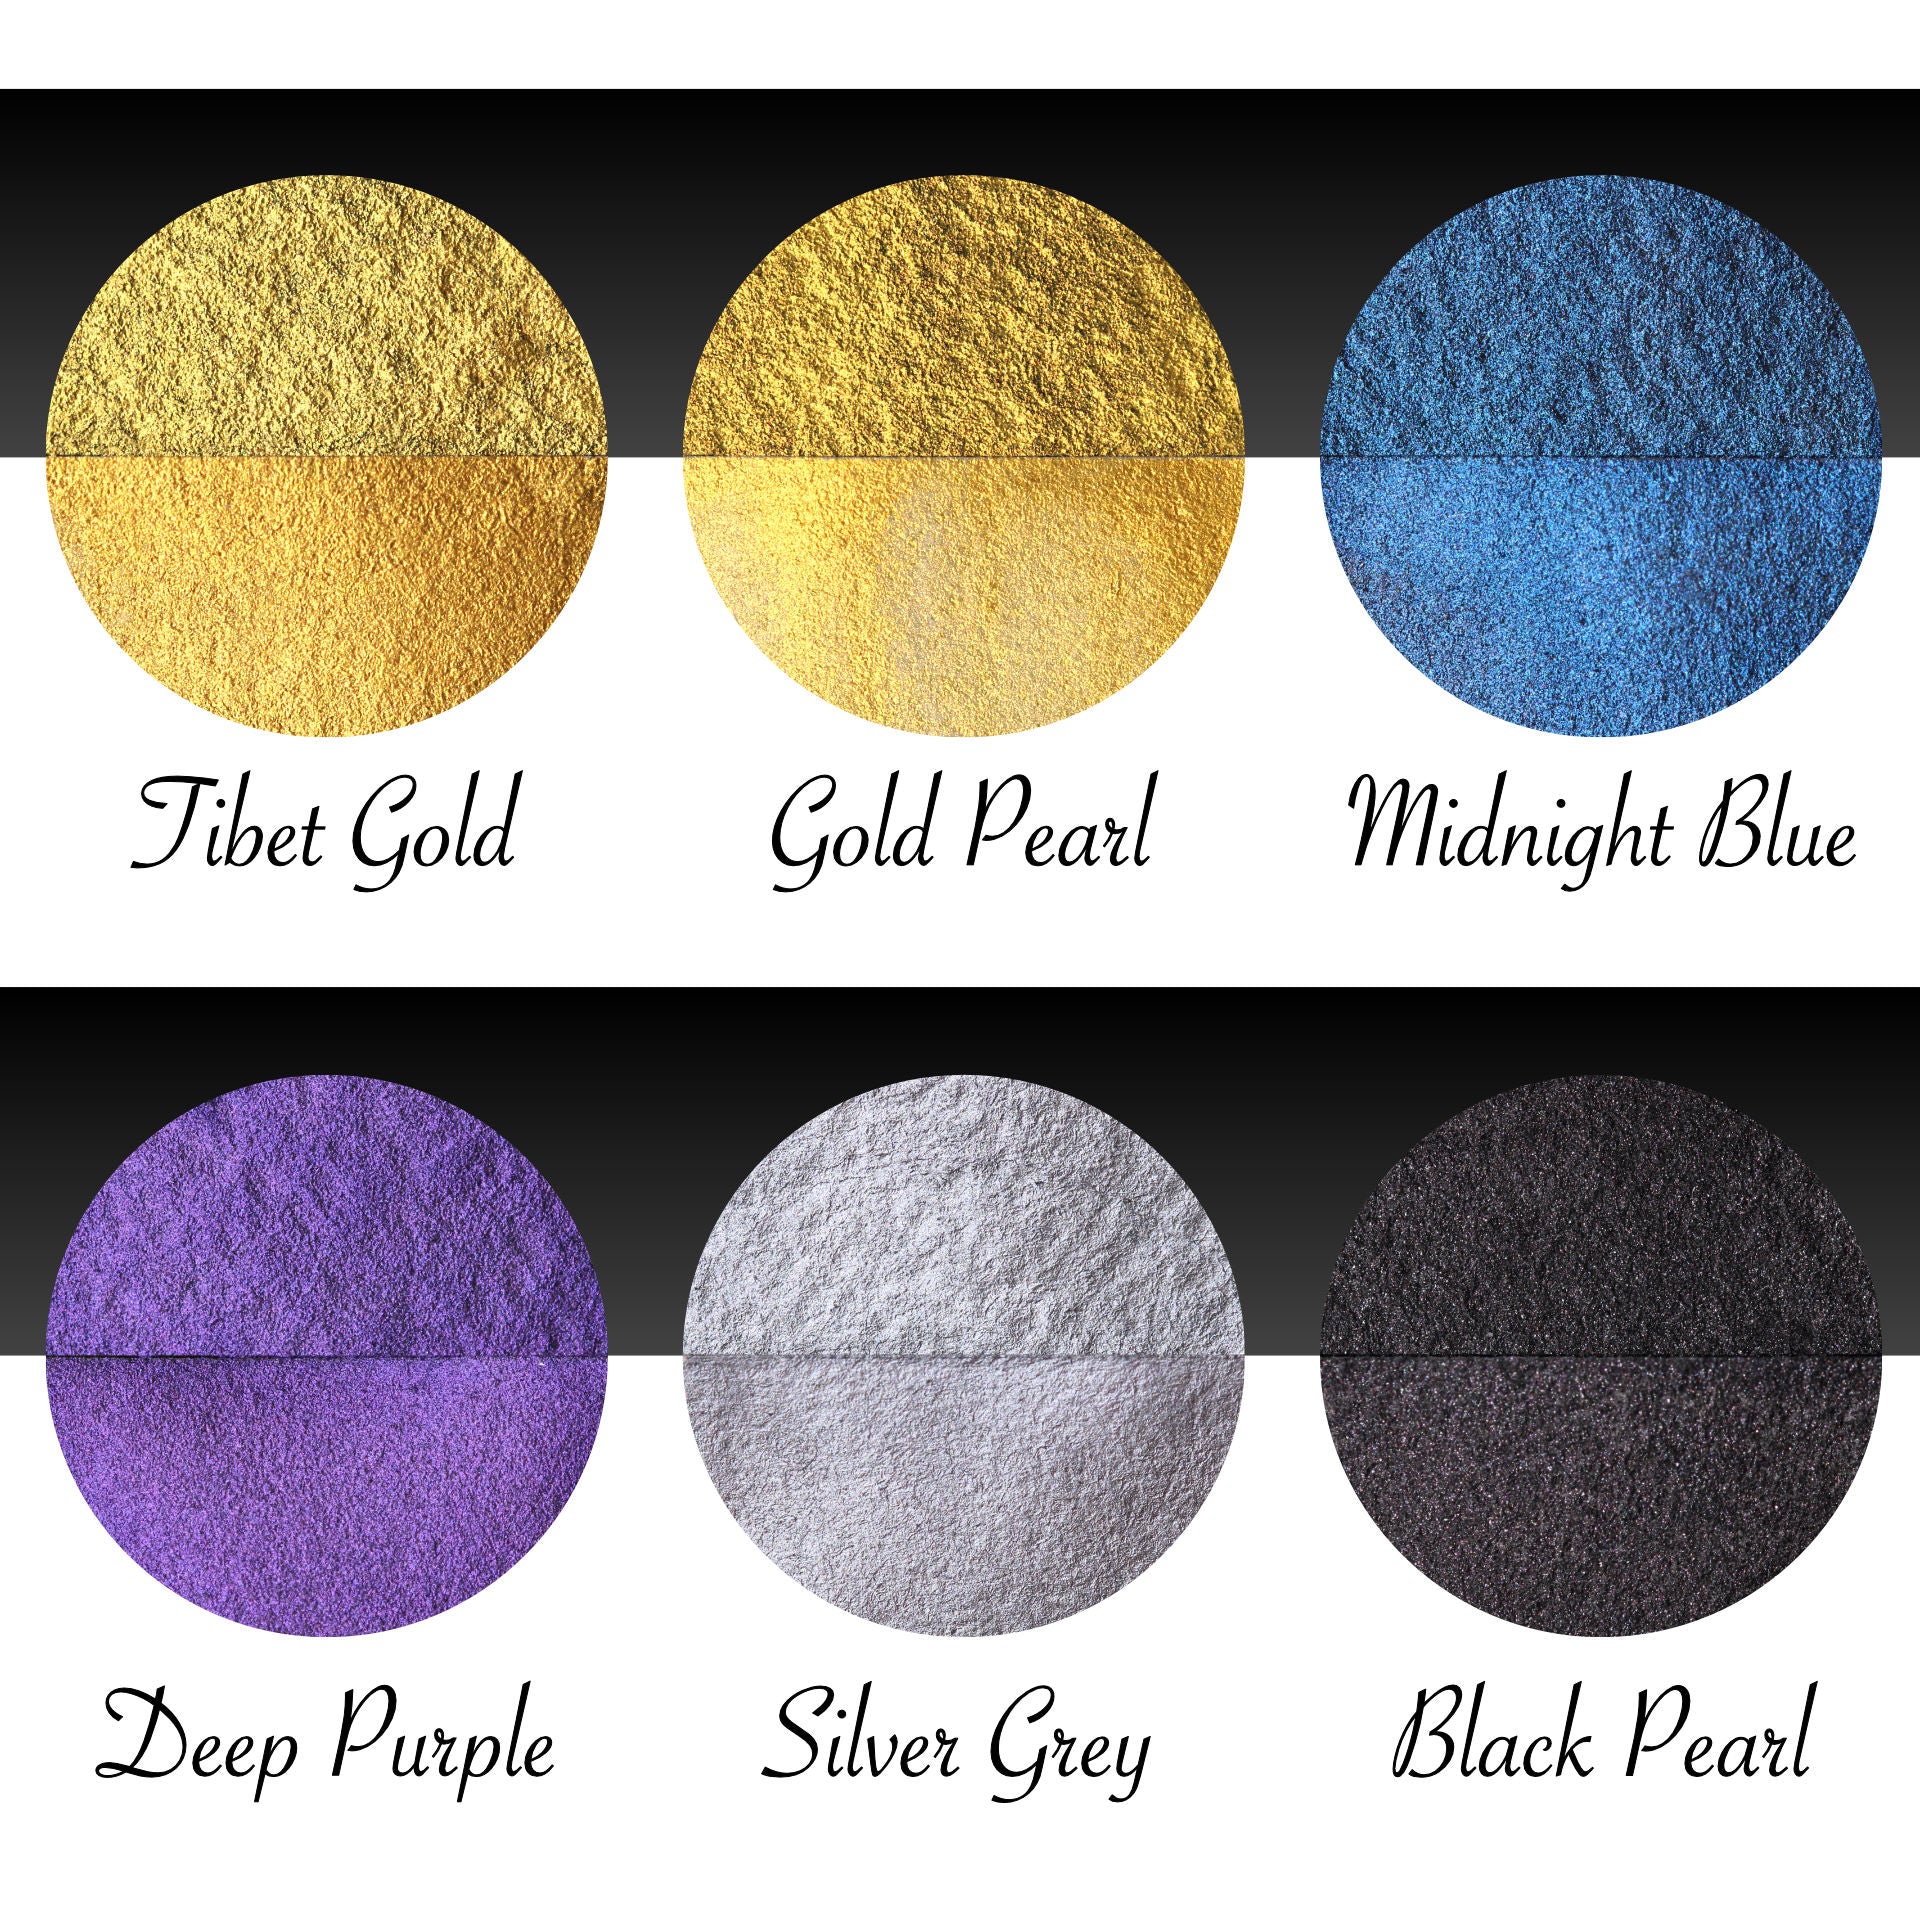 Pharao set includes one pan each of Tibet Gold, Gold Pearl, Midnight Blue, Deep Purple, Silver Grey and Black Pearl. 